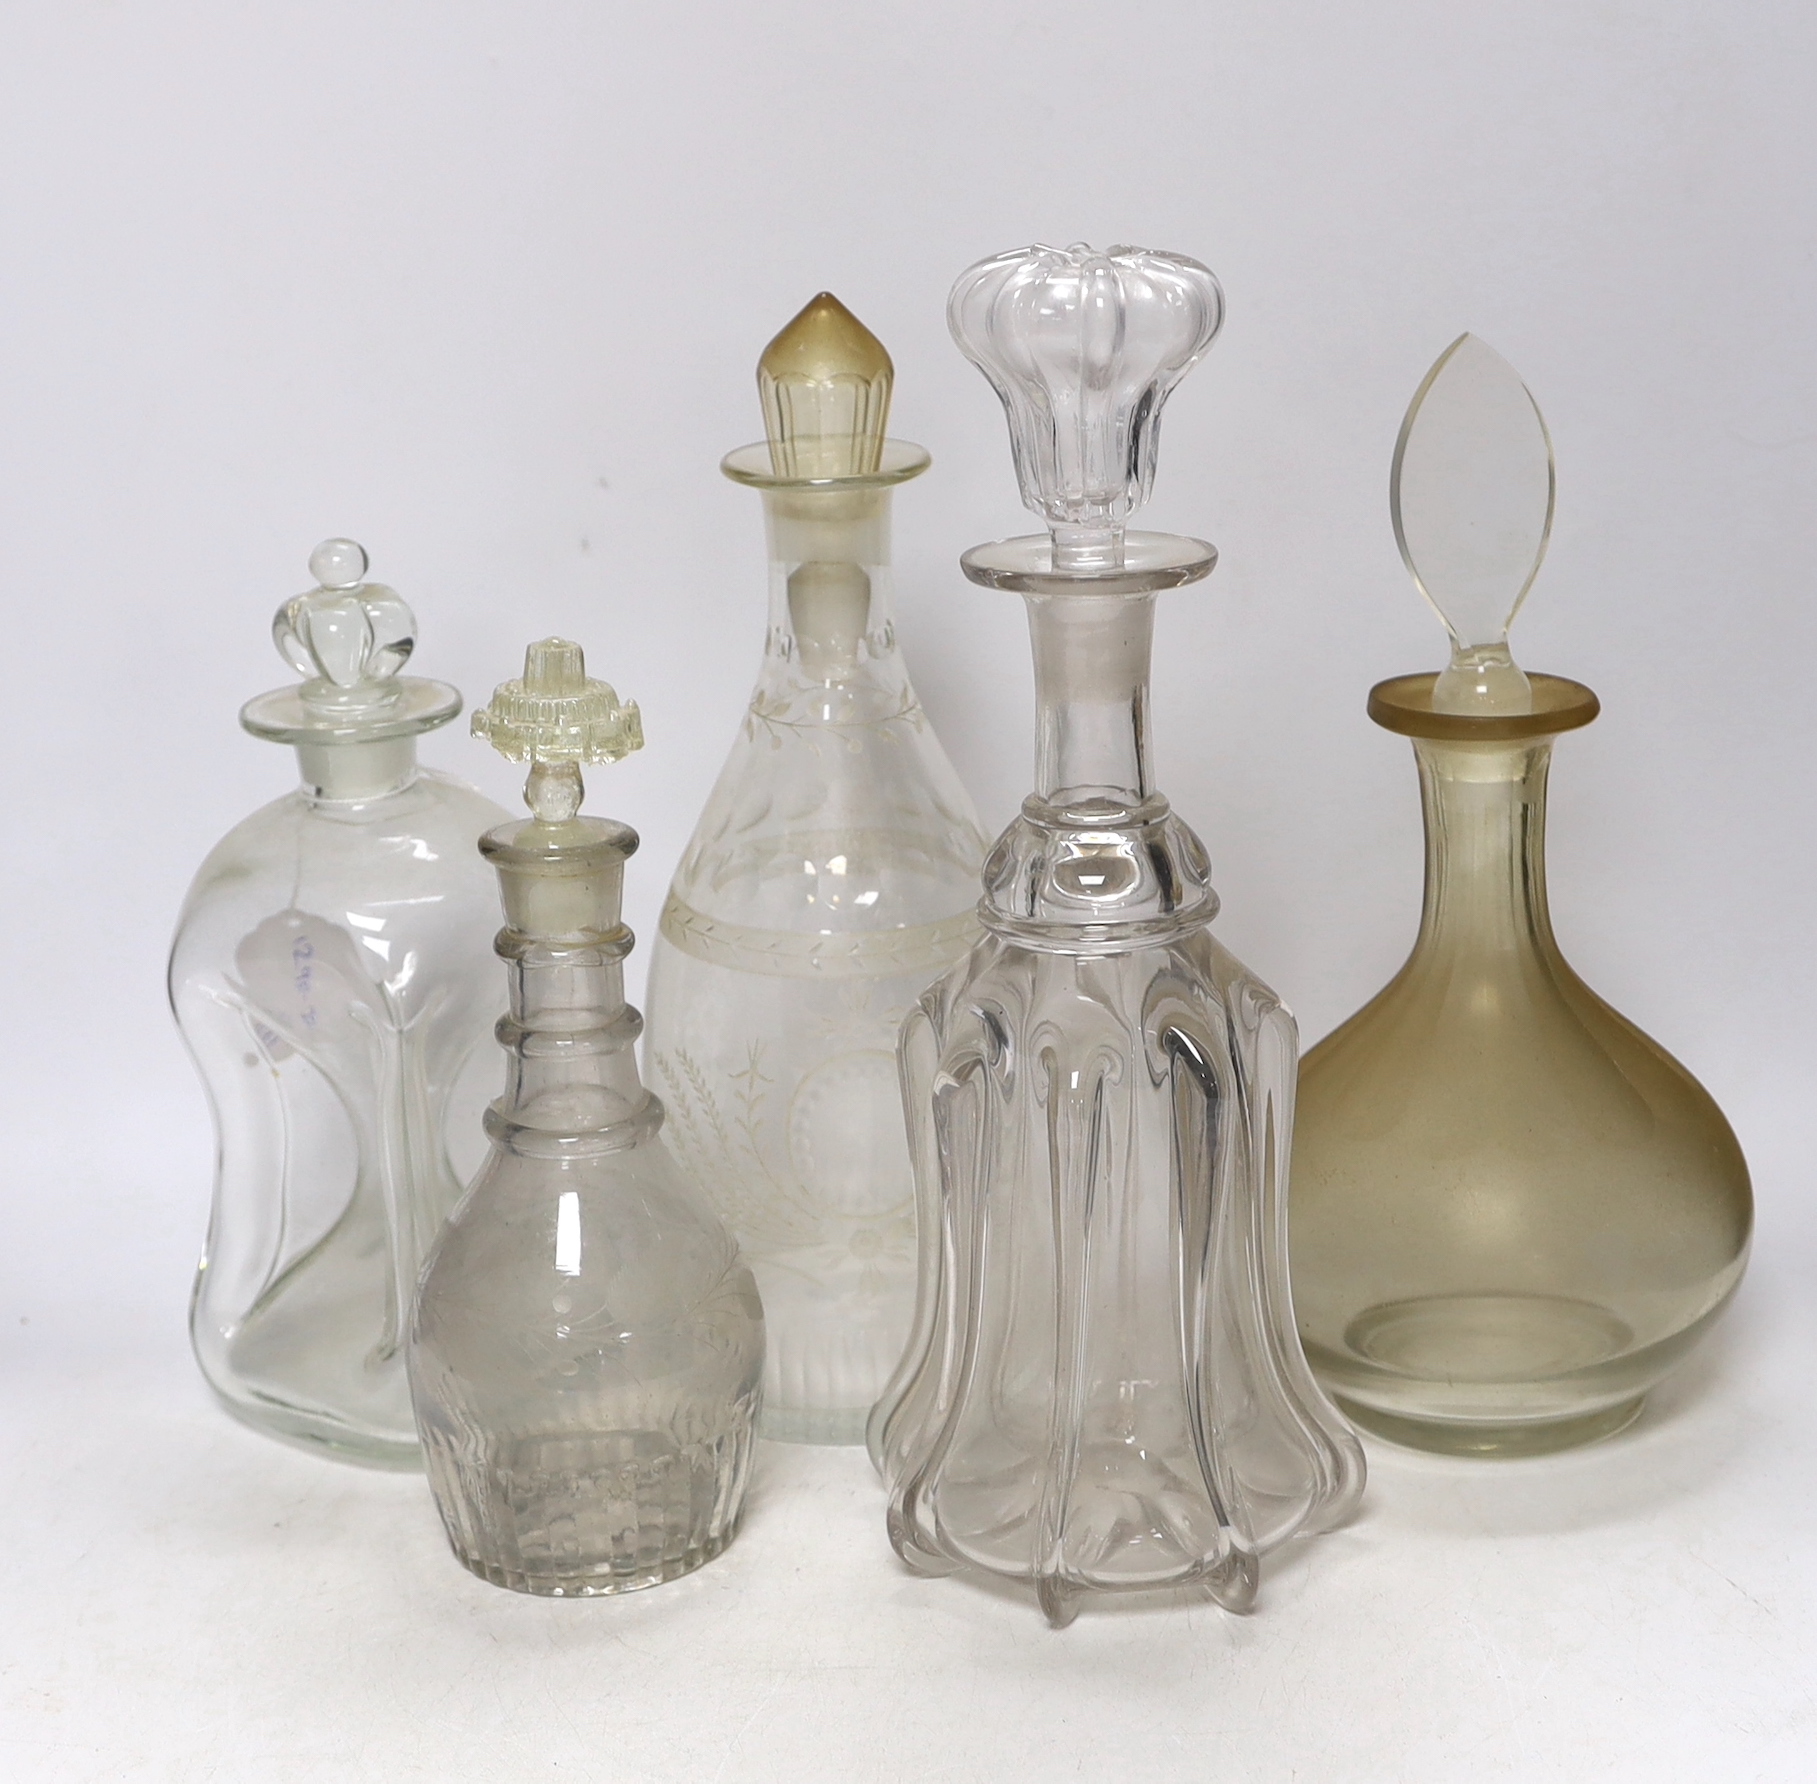 Five 19th century and later glass decanters, one with stopper in the form of a crown, tallest, 32.5cm